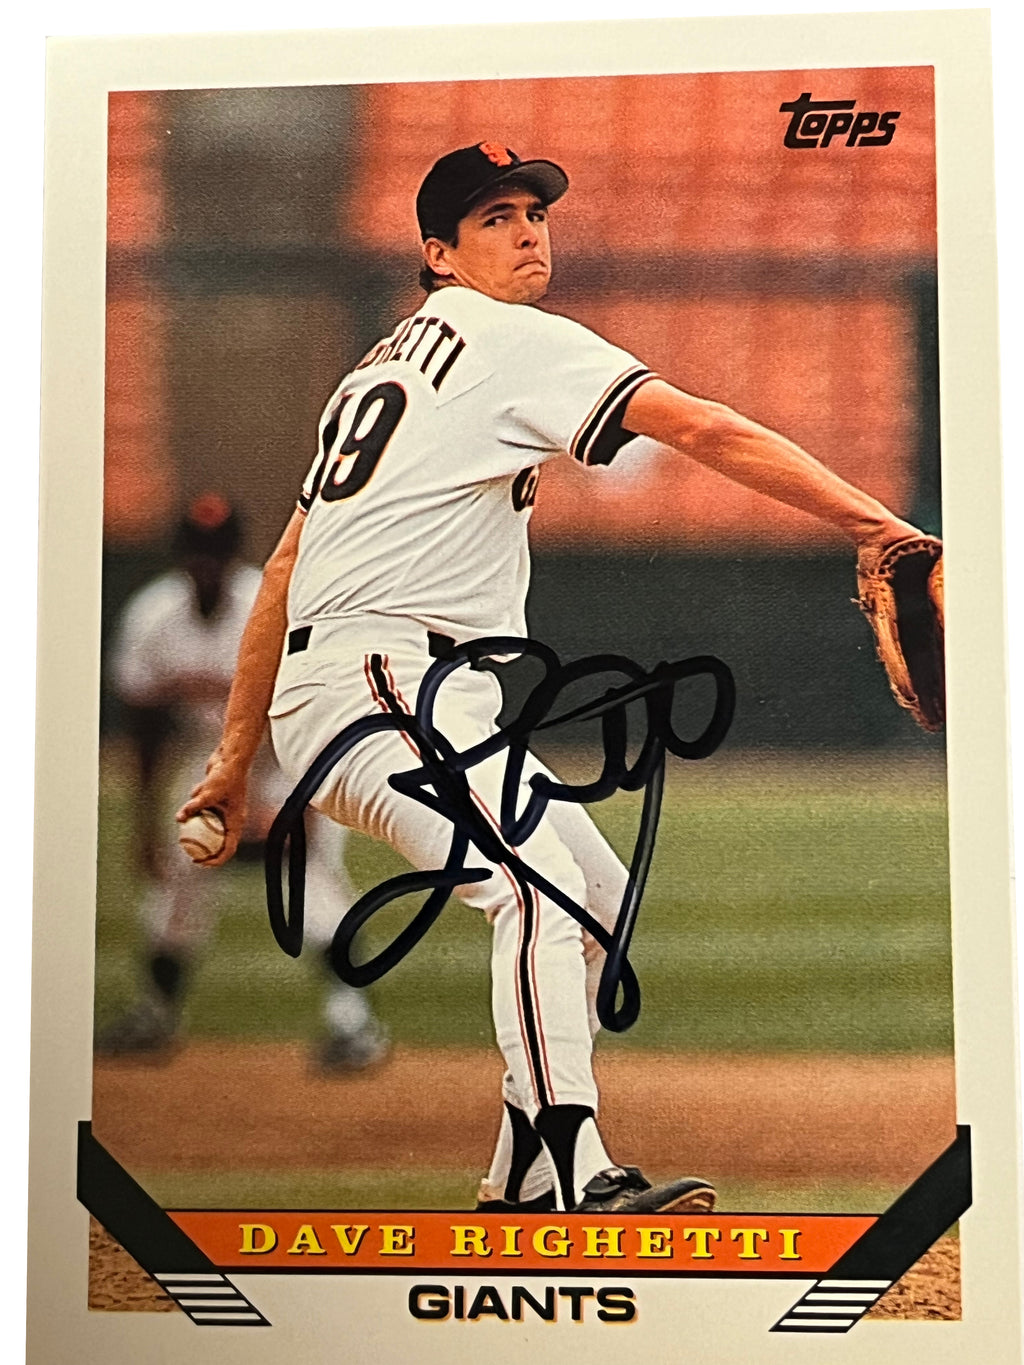 Dave Righetti 1990 Topps Autographed Baseball Card - Player's Closet P